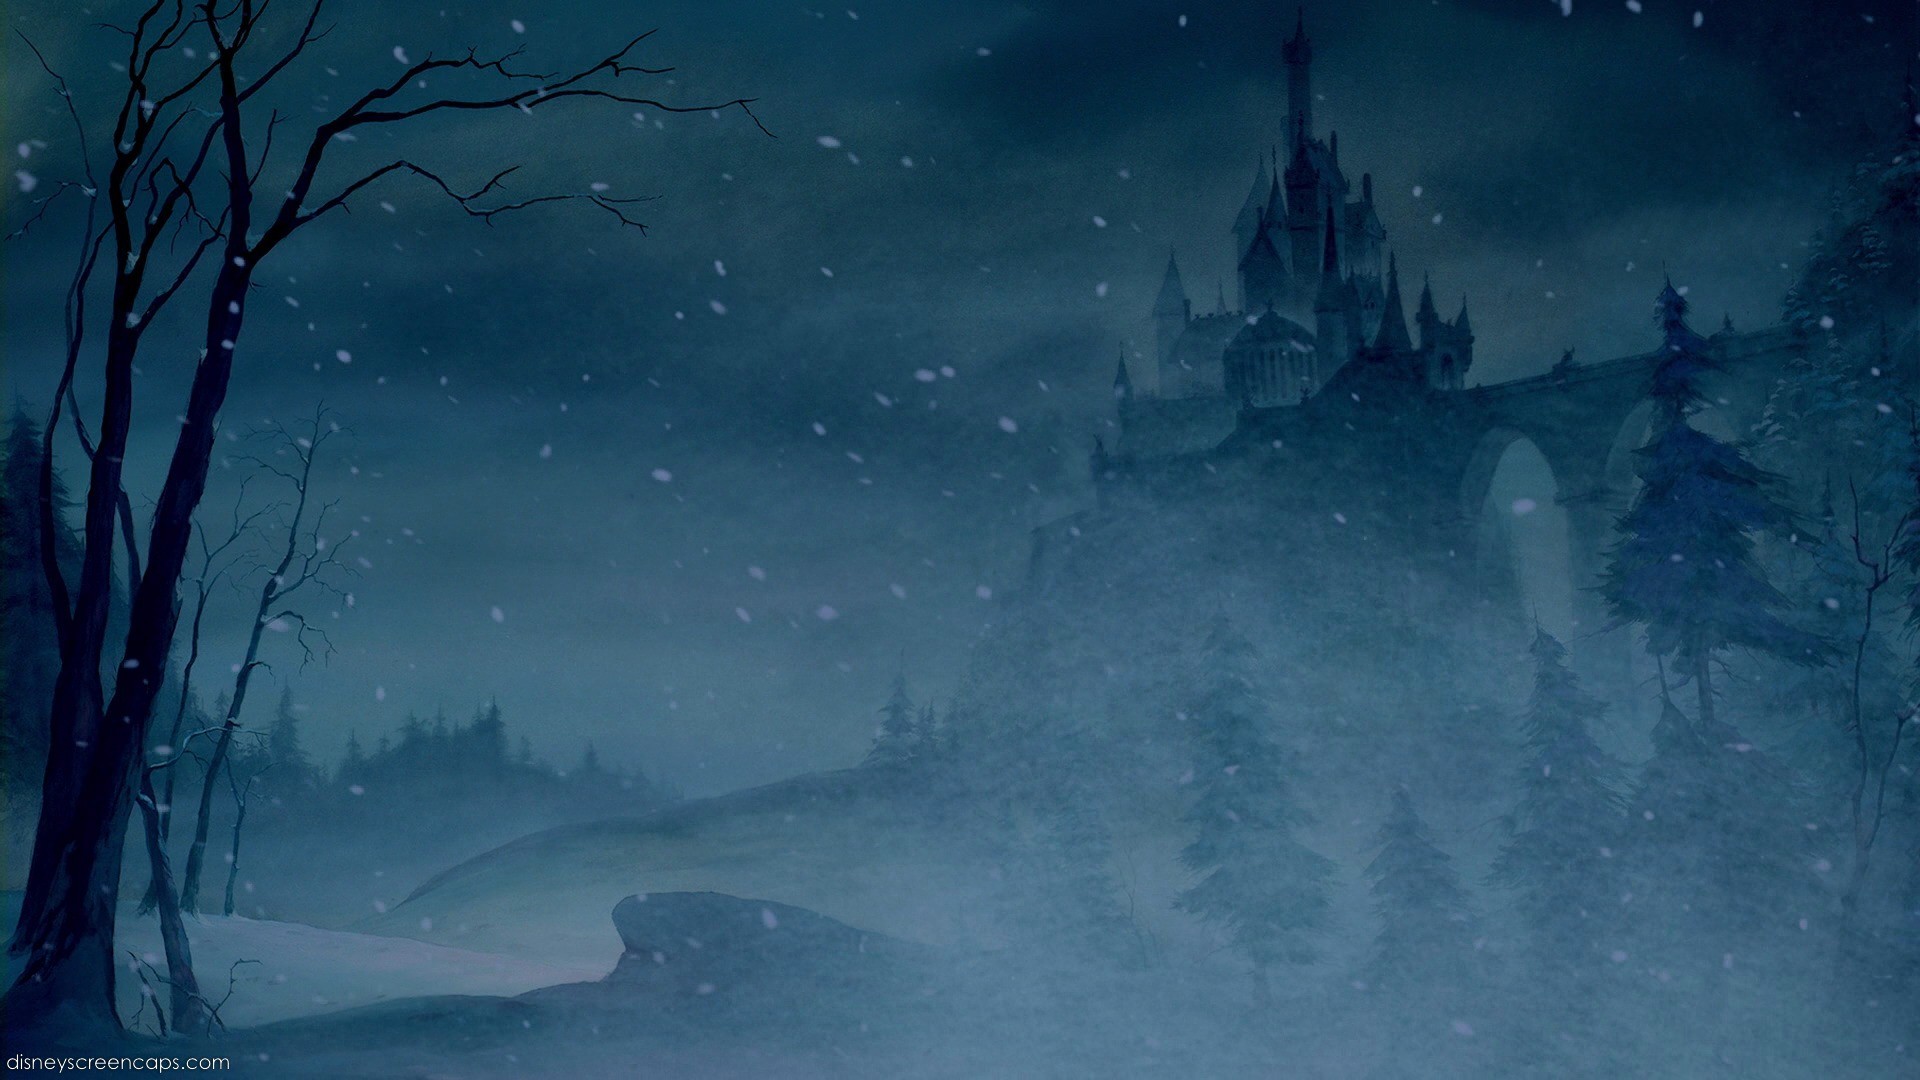 1920x1080 beauty and the beast castle background - Google Search